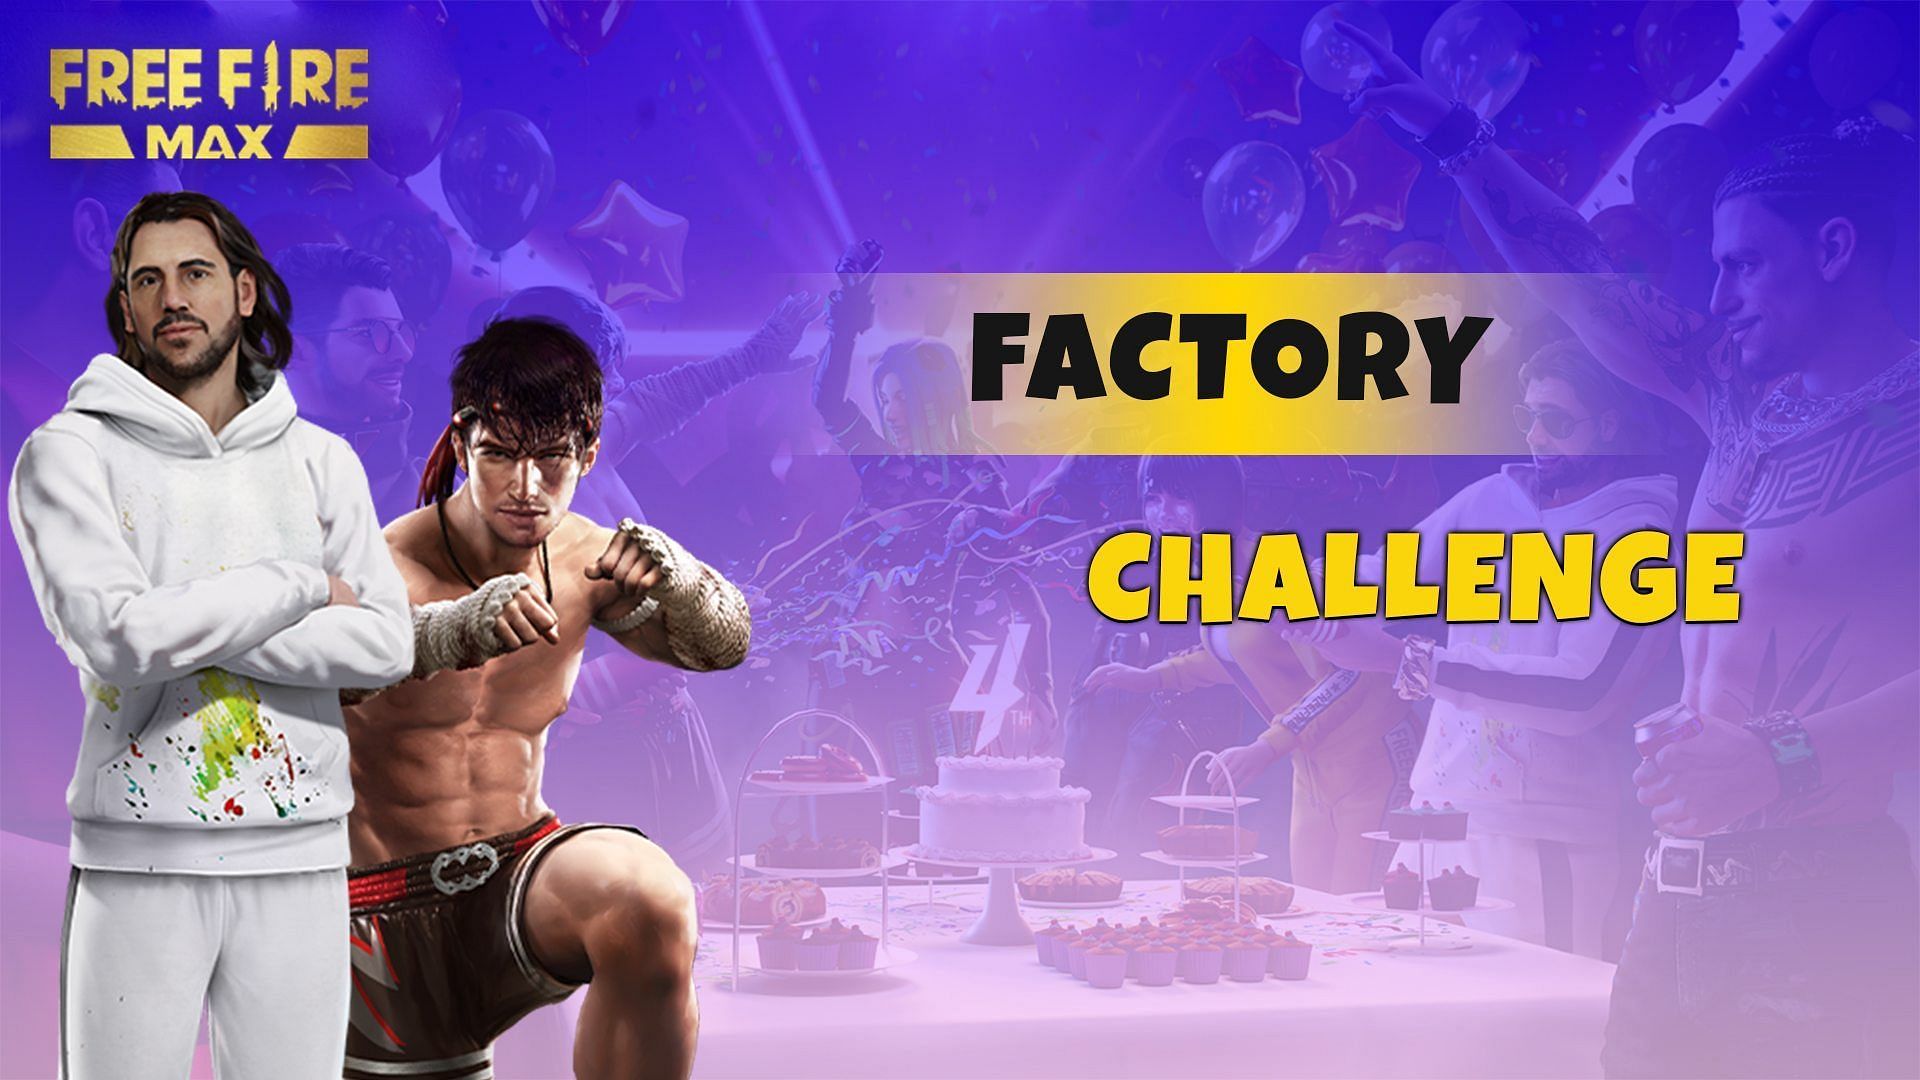 The Factory Fist Challenge is very popular among FF MAX players (Image via Sportskeeda)